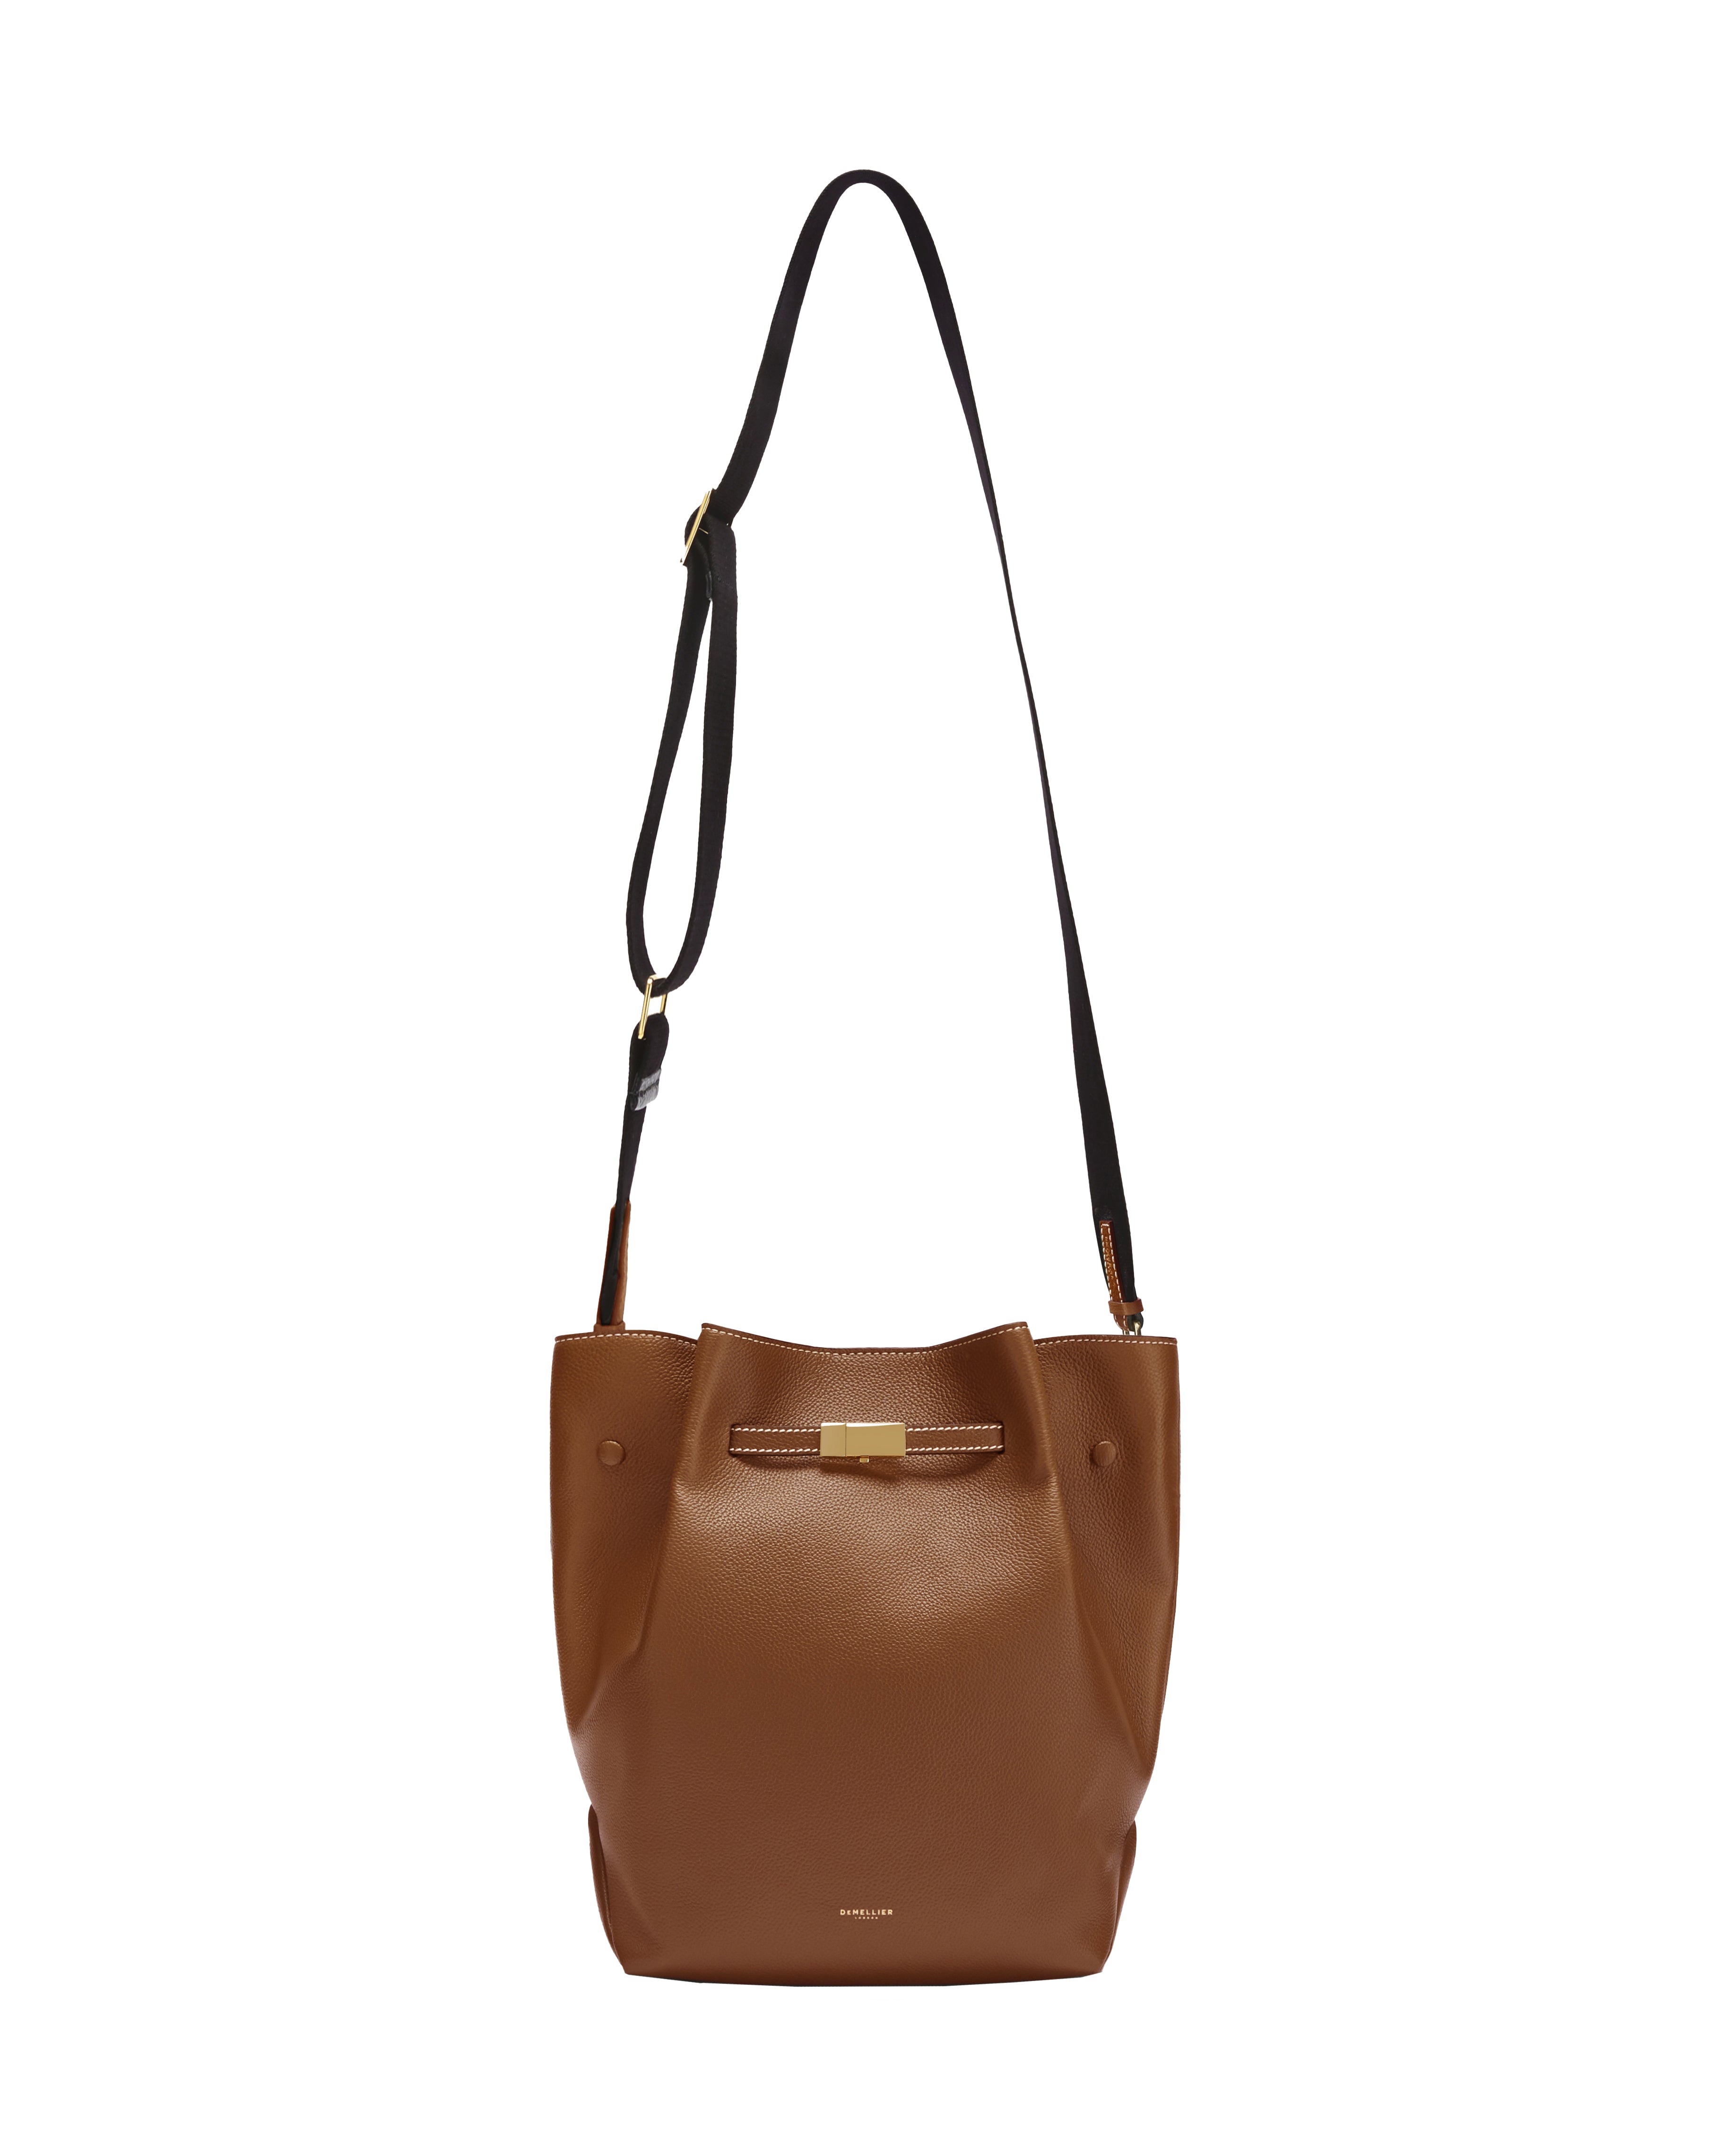 New York Large Bucket Bag (Tan with Stitching)